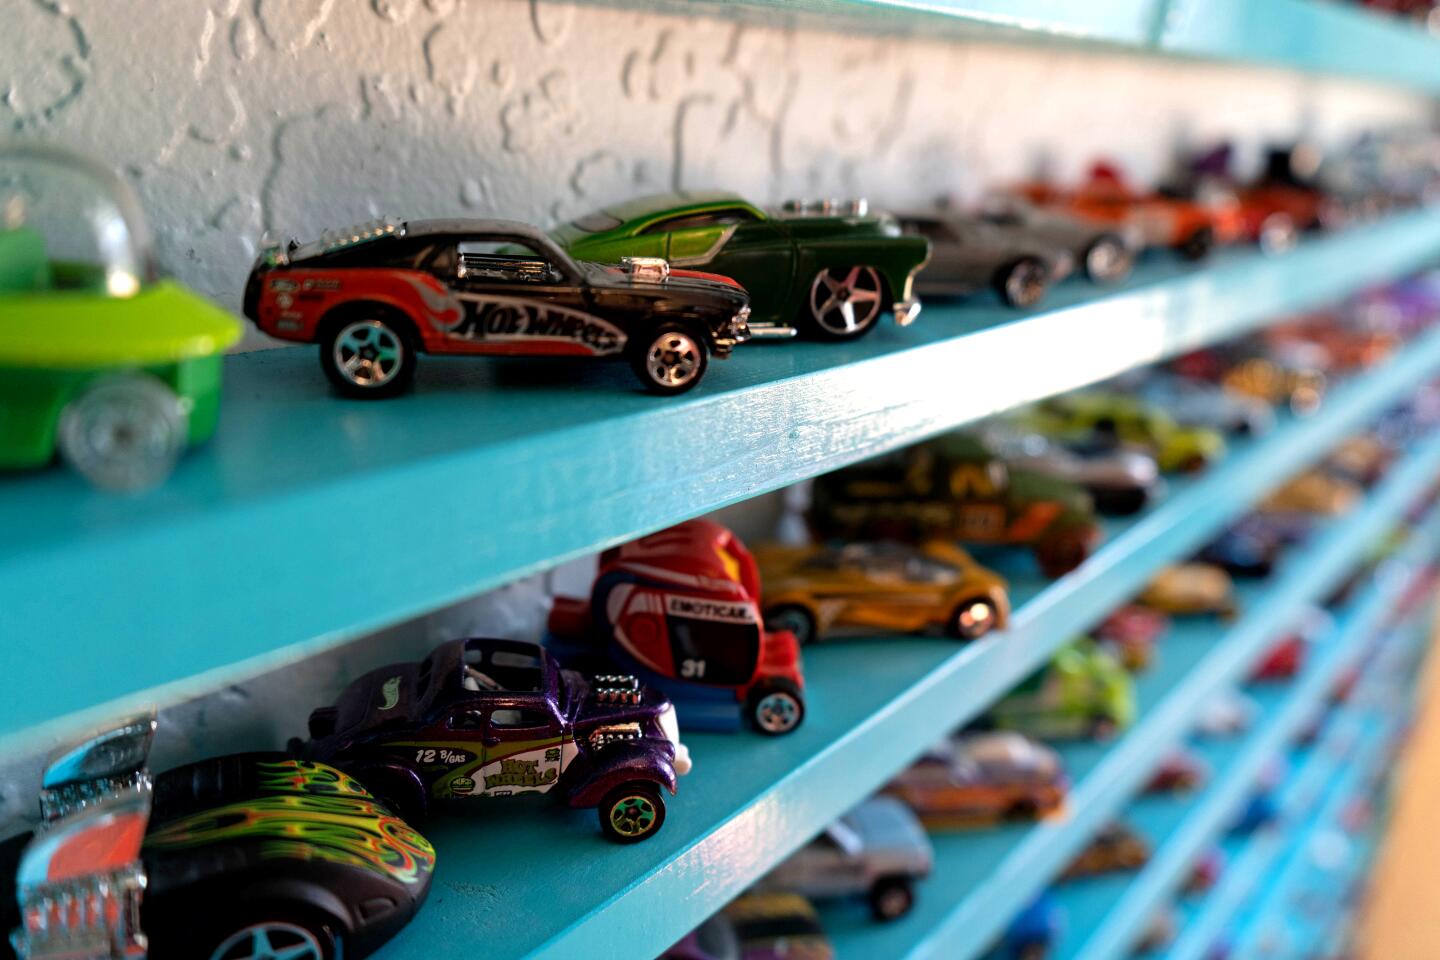 His collection of Hot Wheels cars.